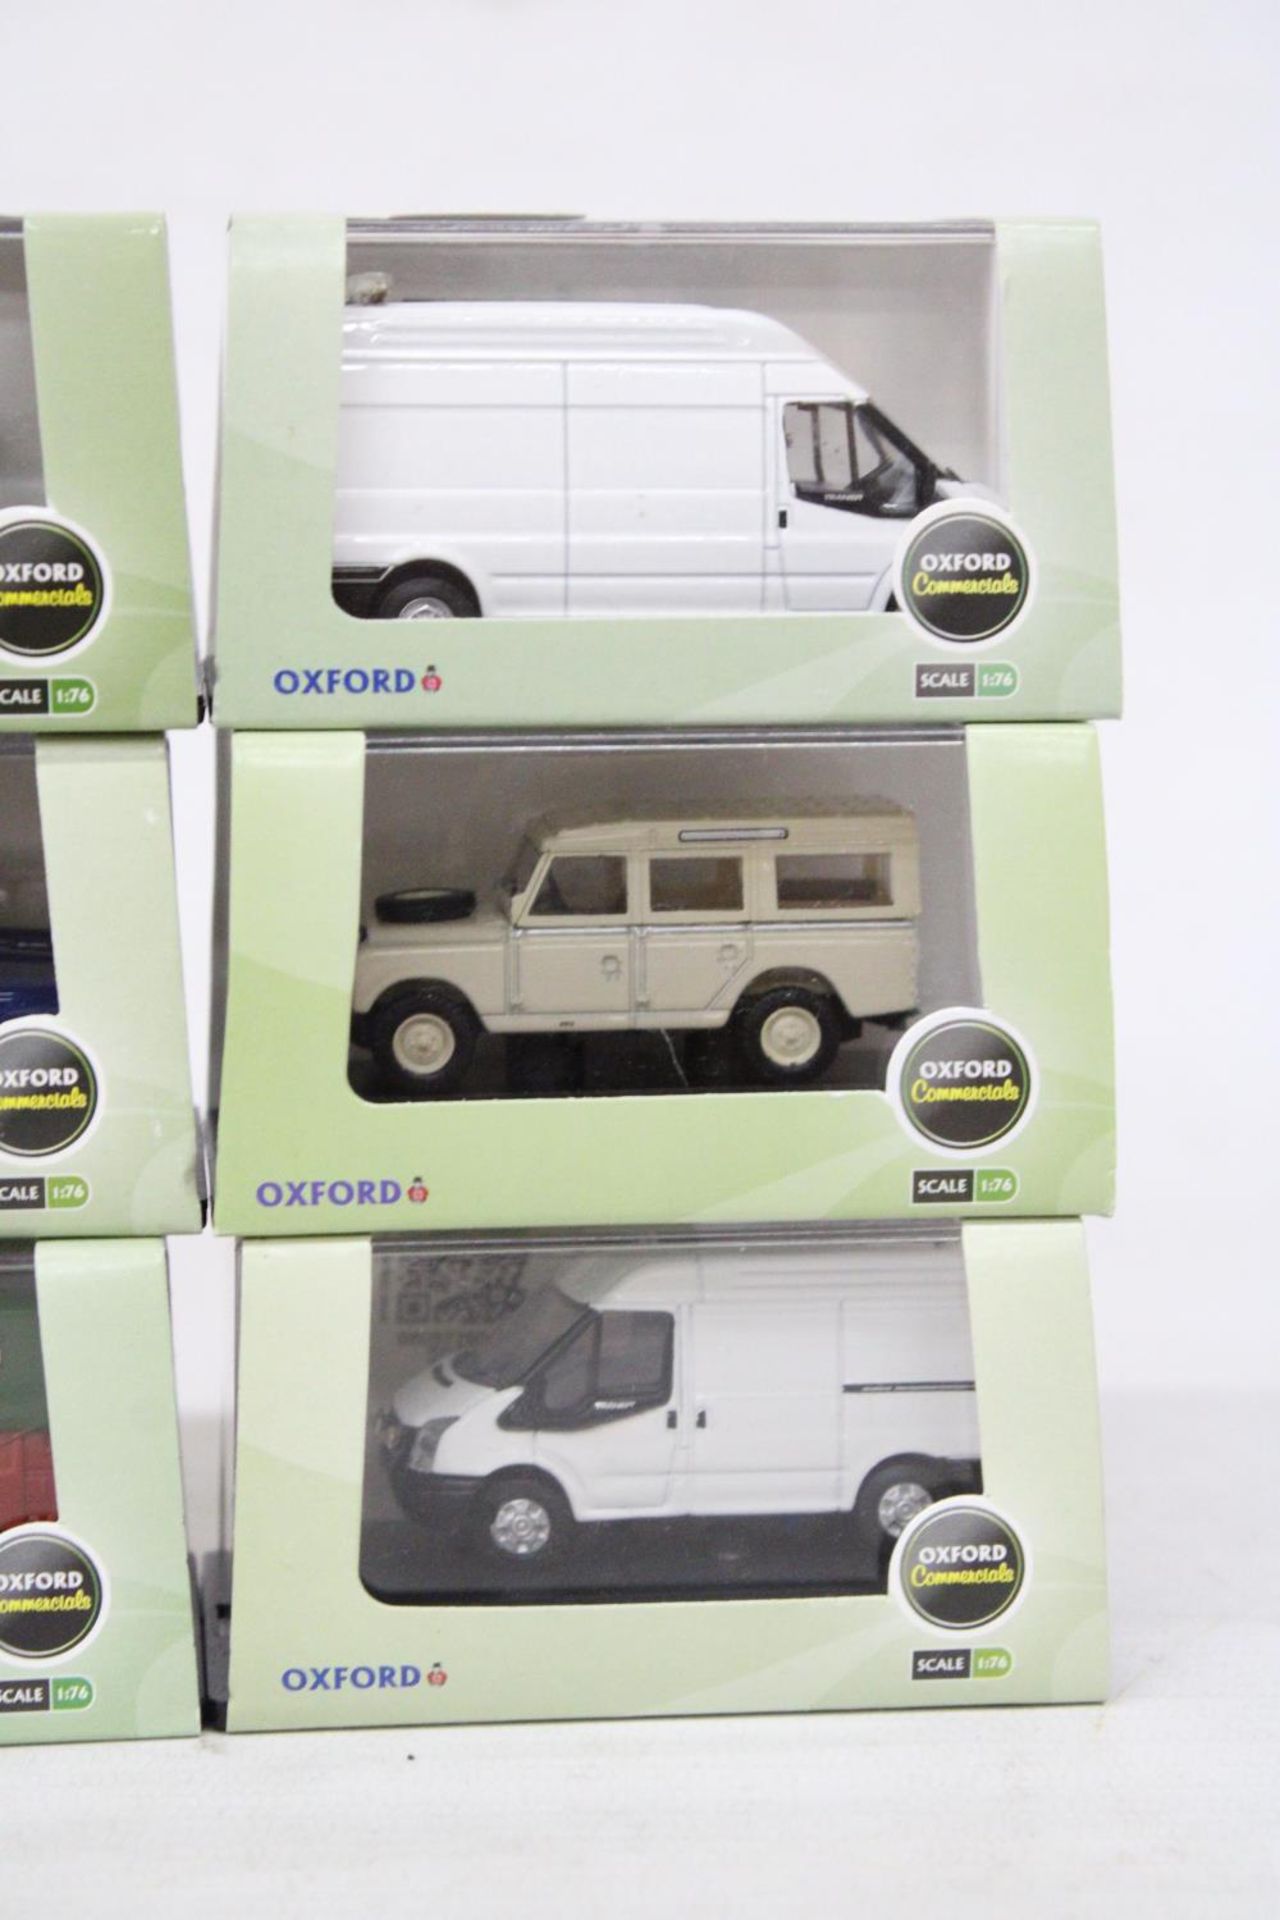 SIX AS NEW AND BOXED OXFORD COMMERCIAL VEHICLES - Image 3 of 9